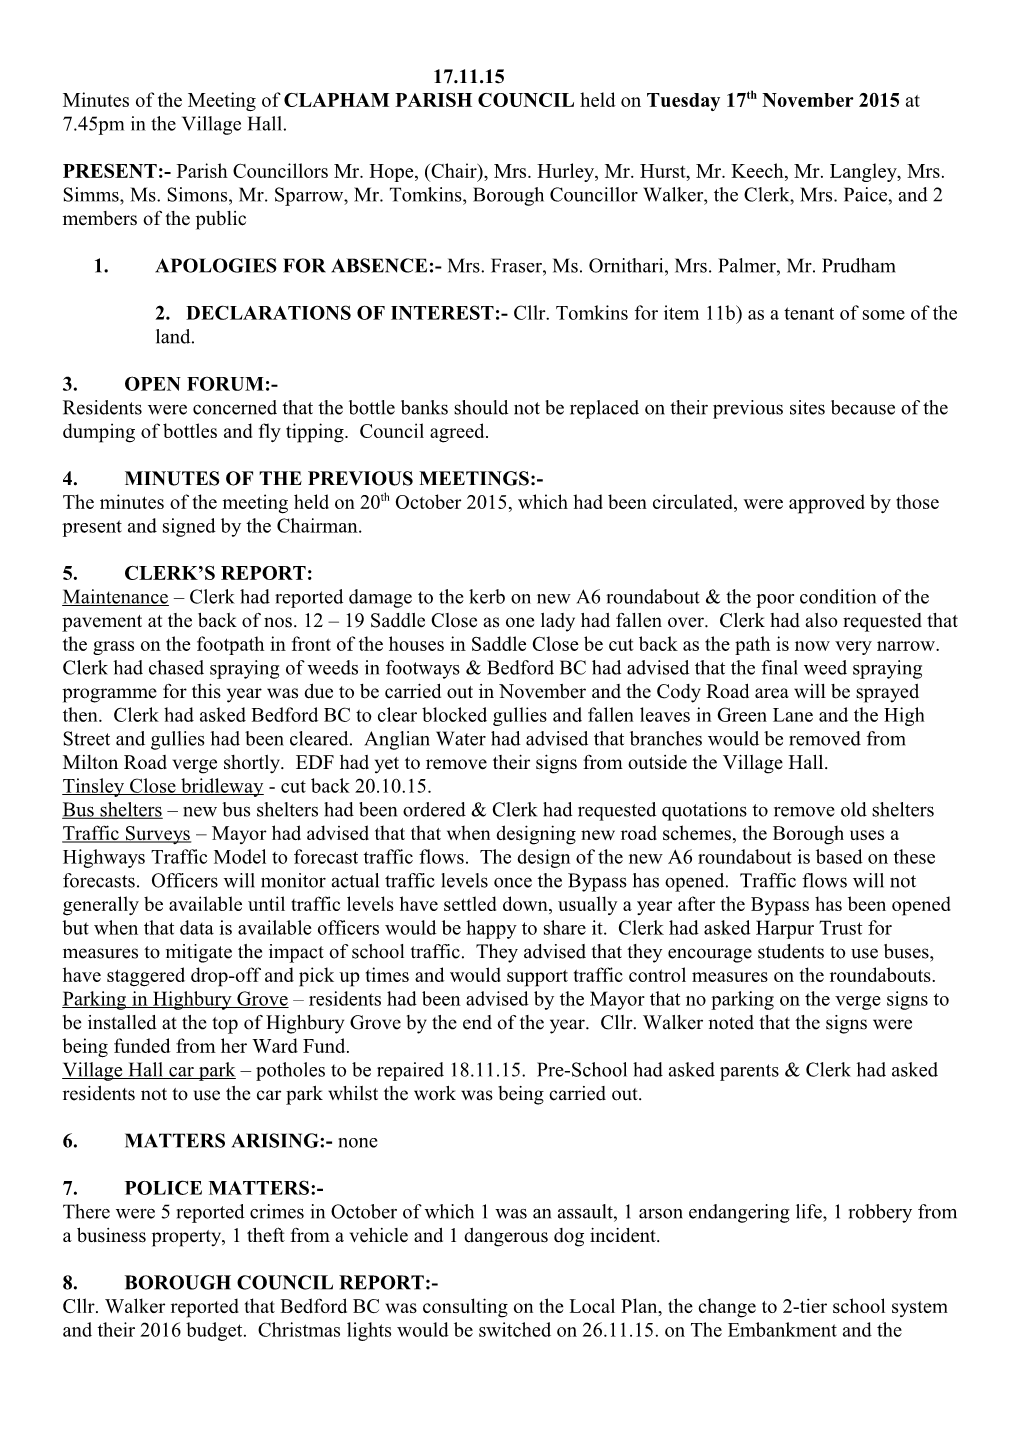 Minutes of the Meeting of CLAPHAM PARISH COUNCIL Held on Tuesday 17Thnovember 2015 at 7.45Pm